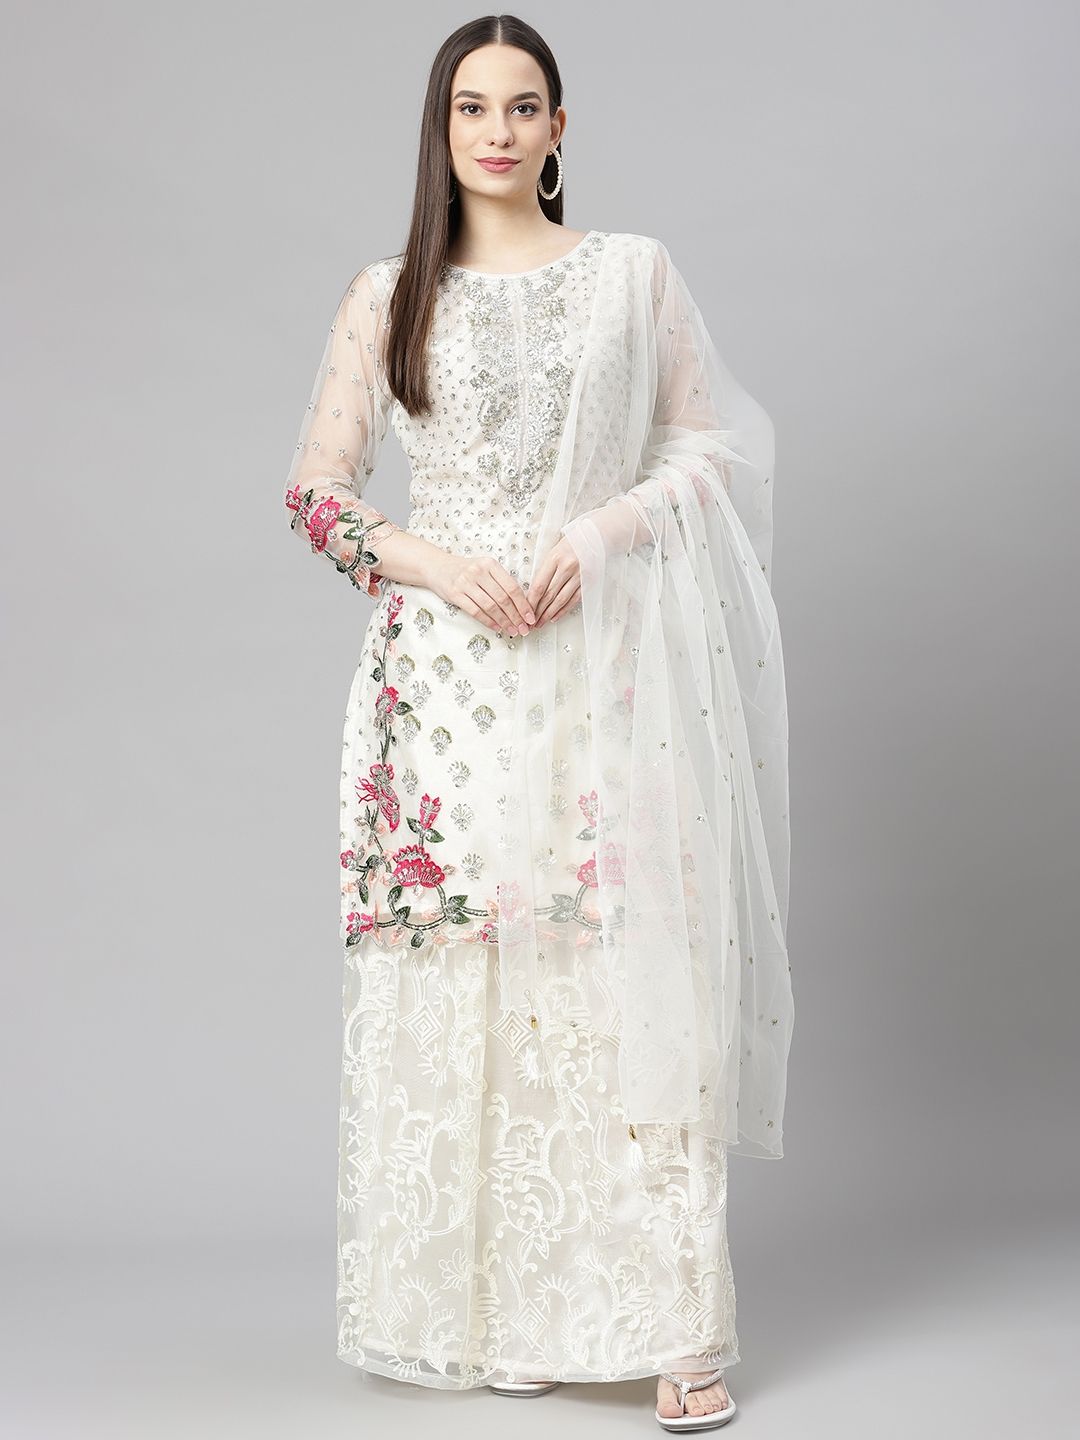 Readiprint Fashions White Embellished Unstitched Dress Material Price in India